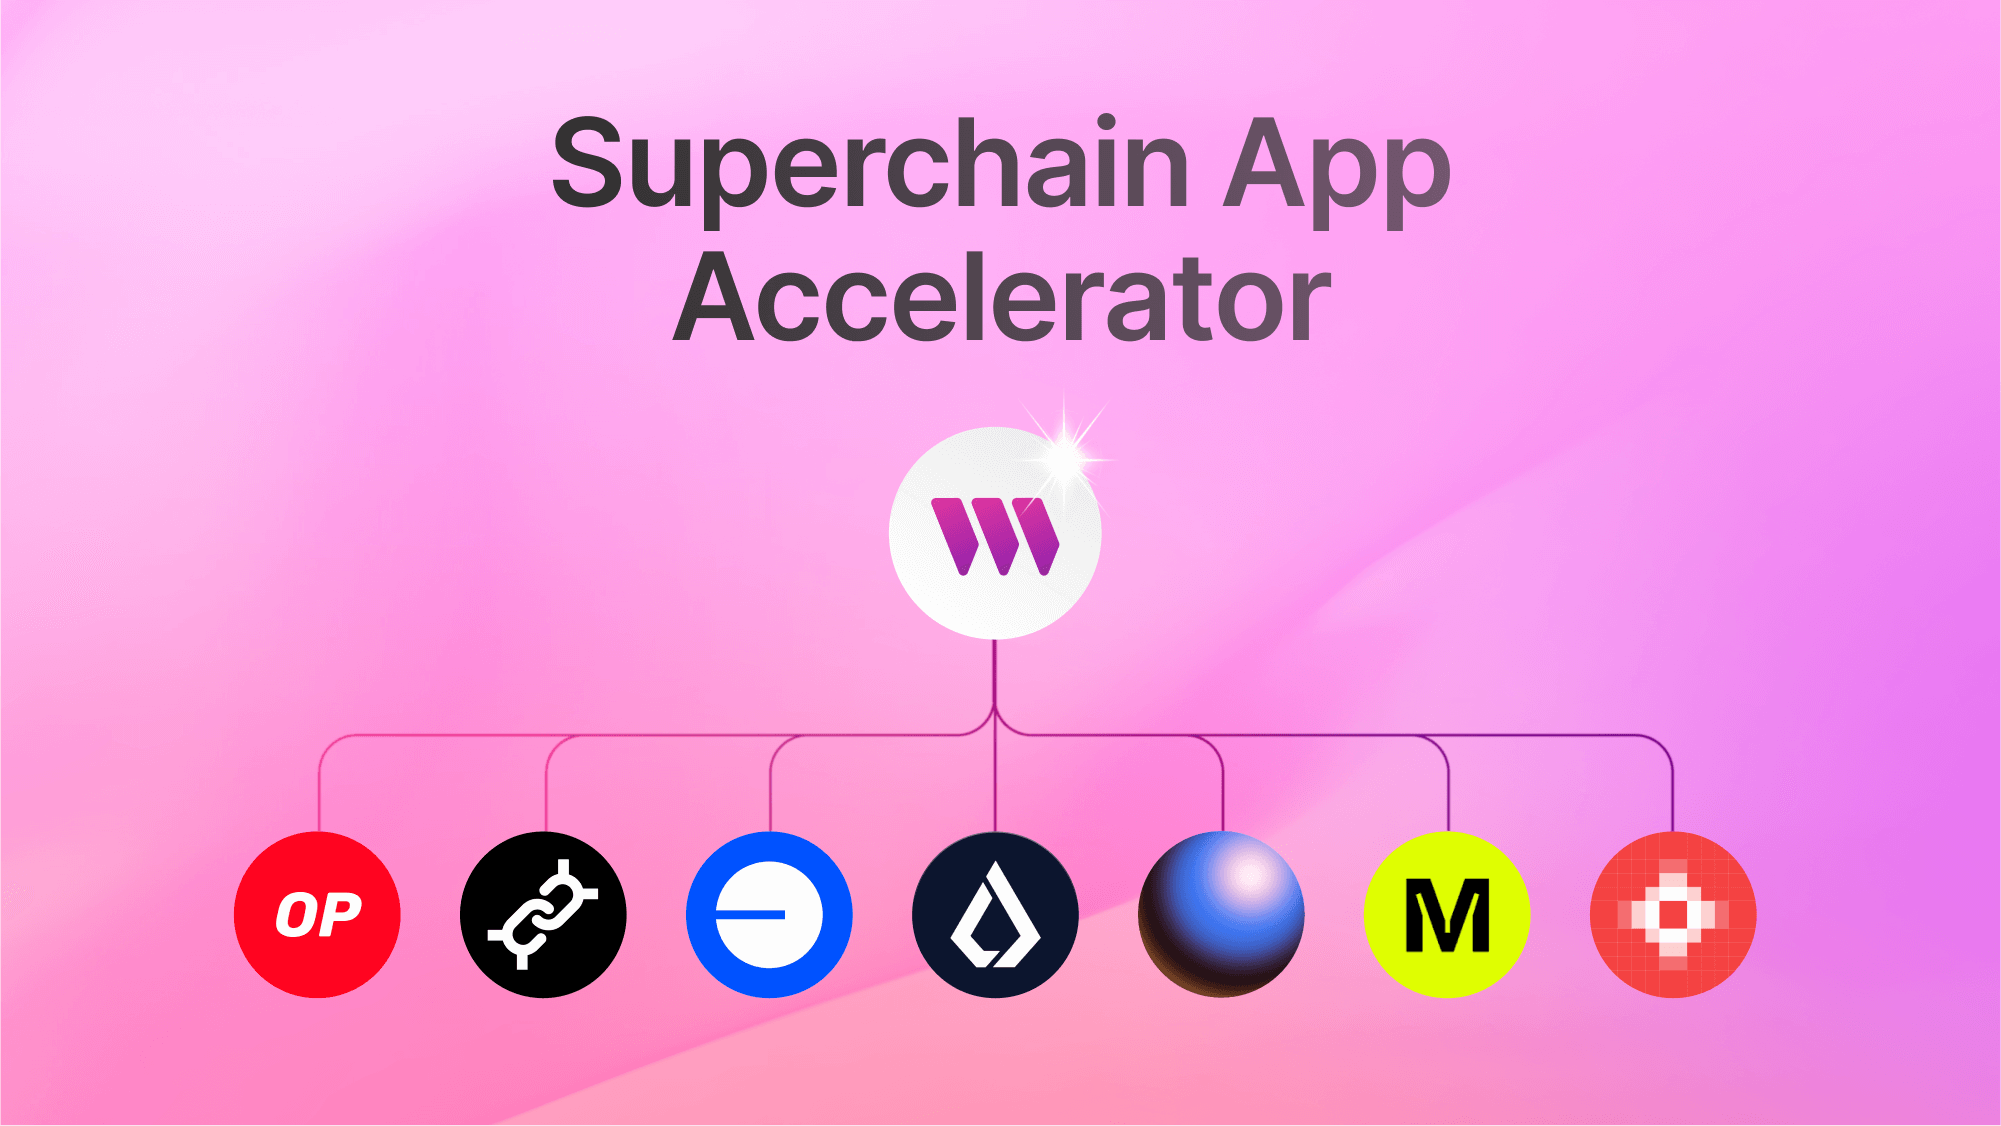 Superchain App Accelerator - Powered by thirdweb and Optimism